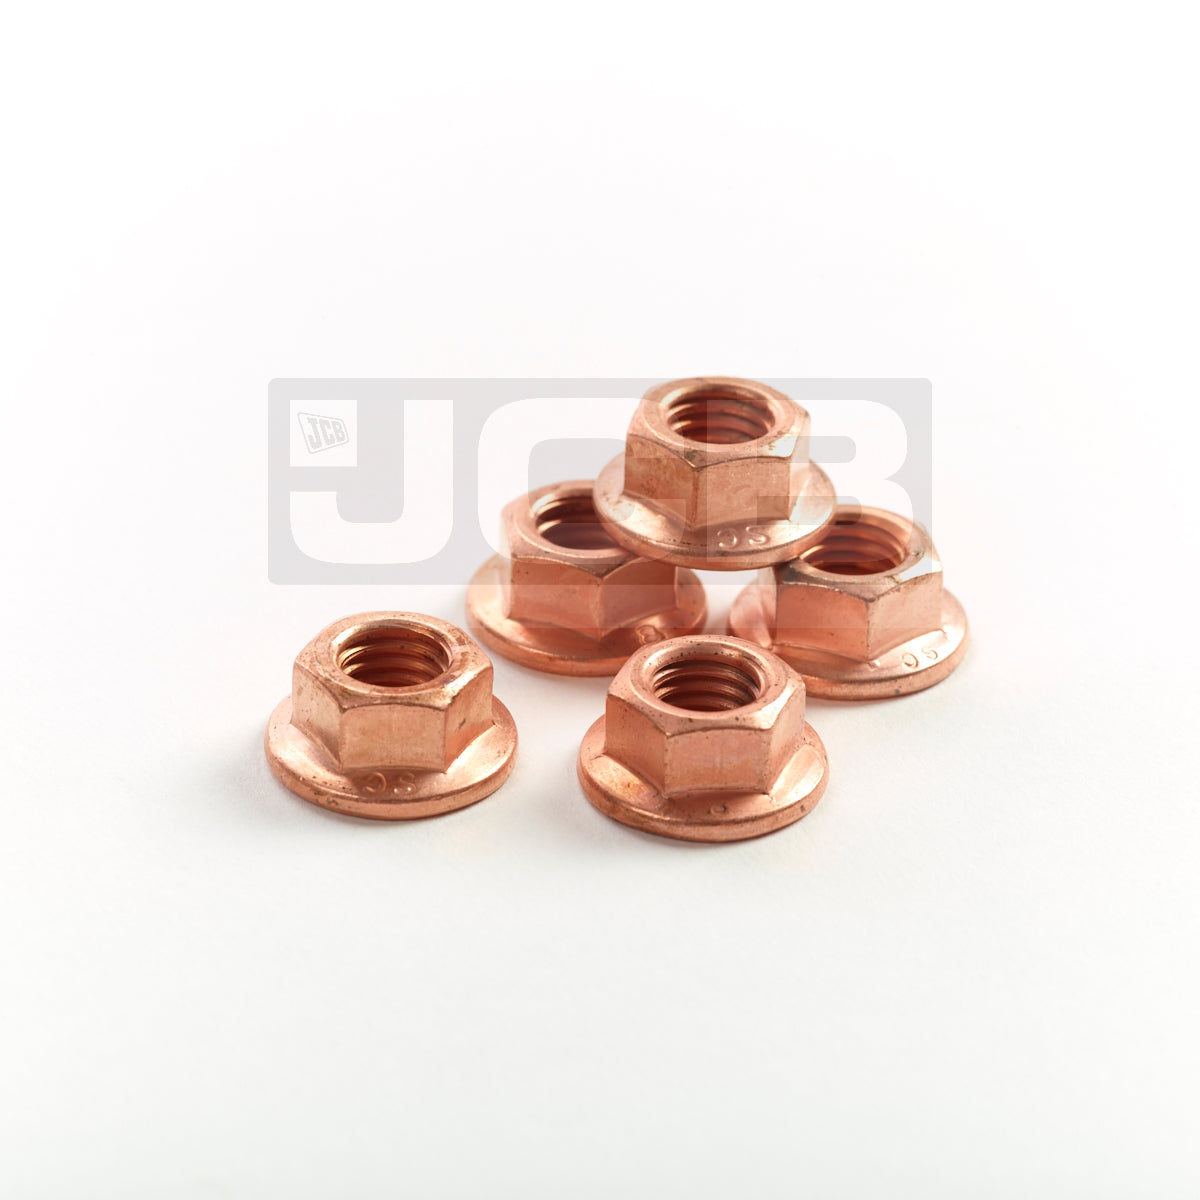 JCB M10 exhaust Nut : 826/11377 (Pack of 5)